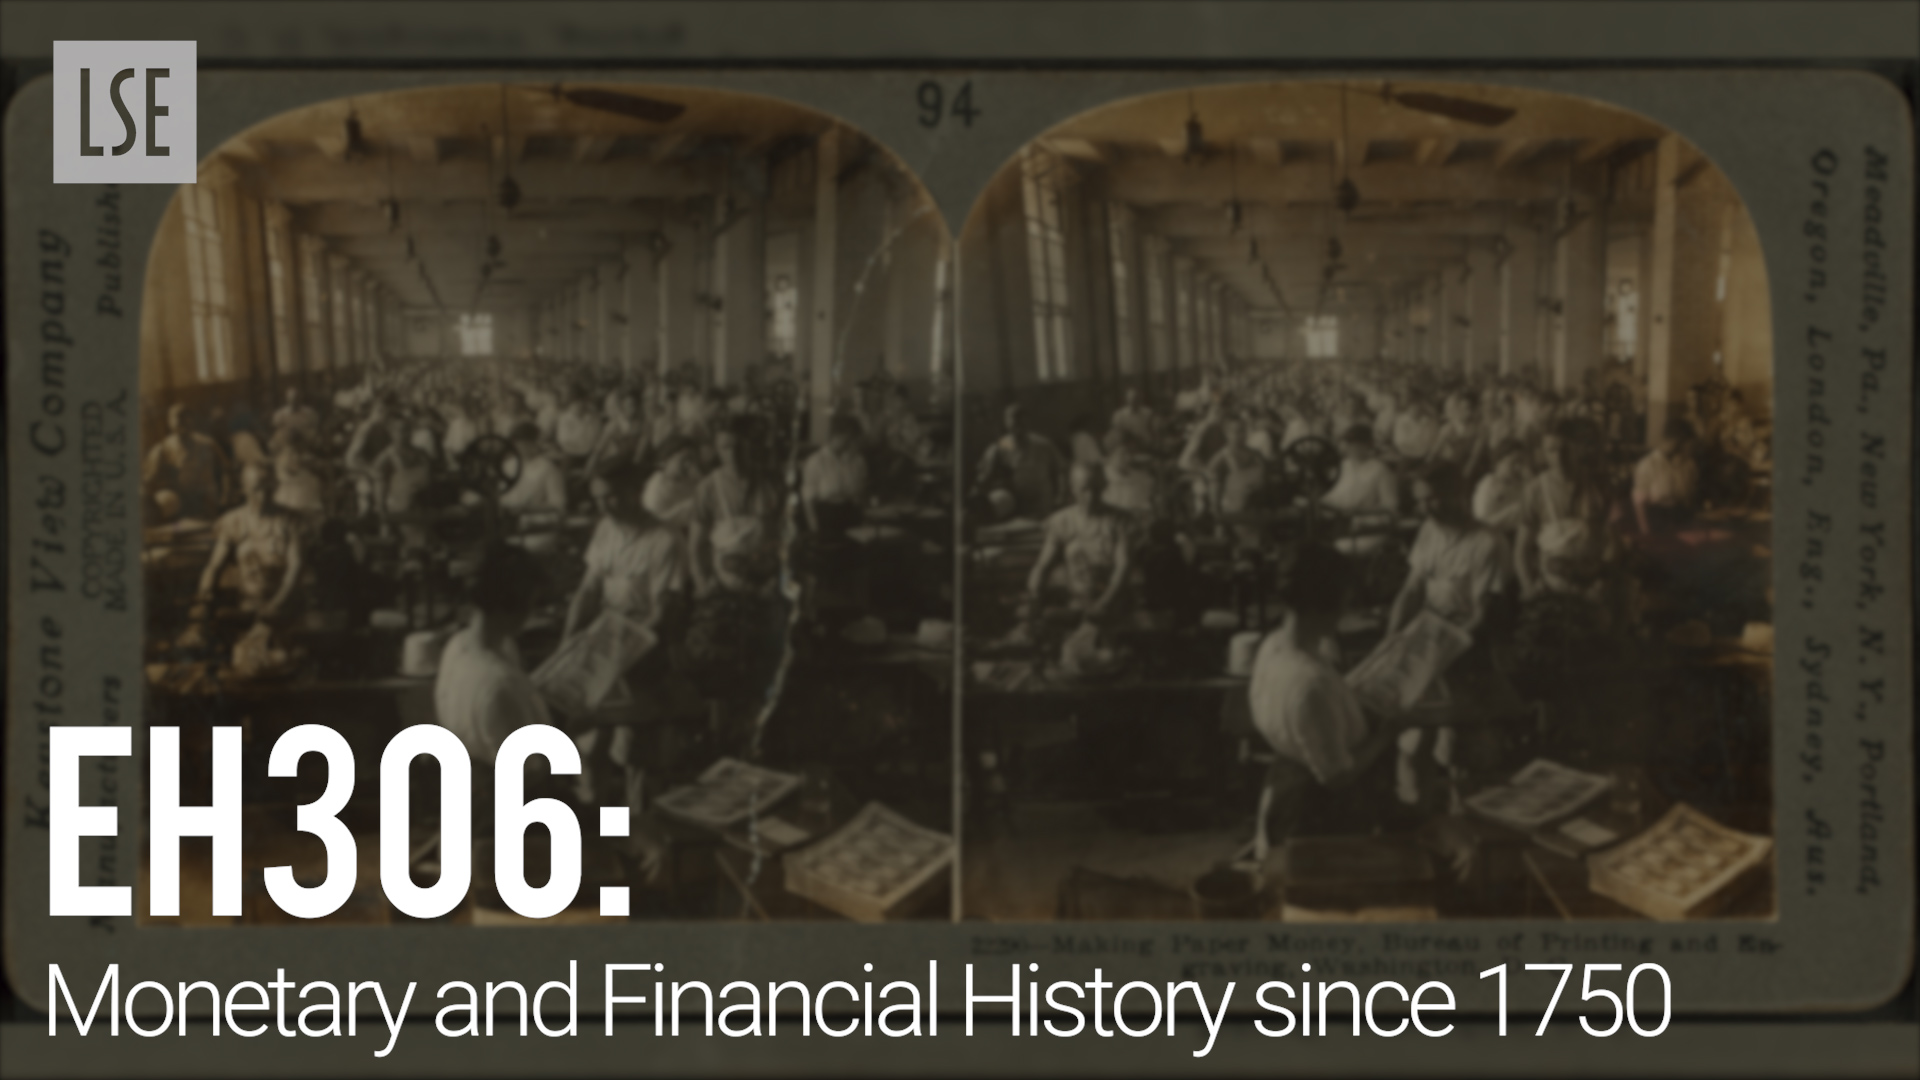 EH306 - Monetary and Financial History since 1750, by Dr Olivier Accominotti